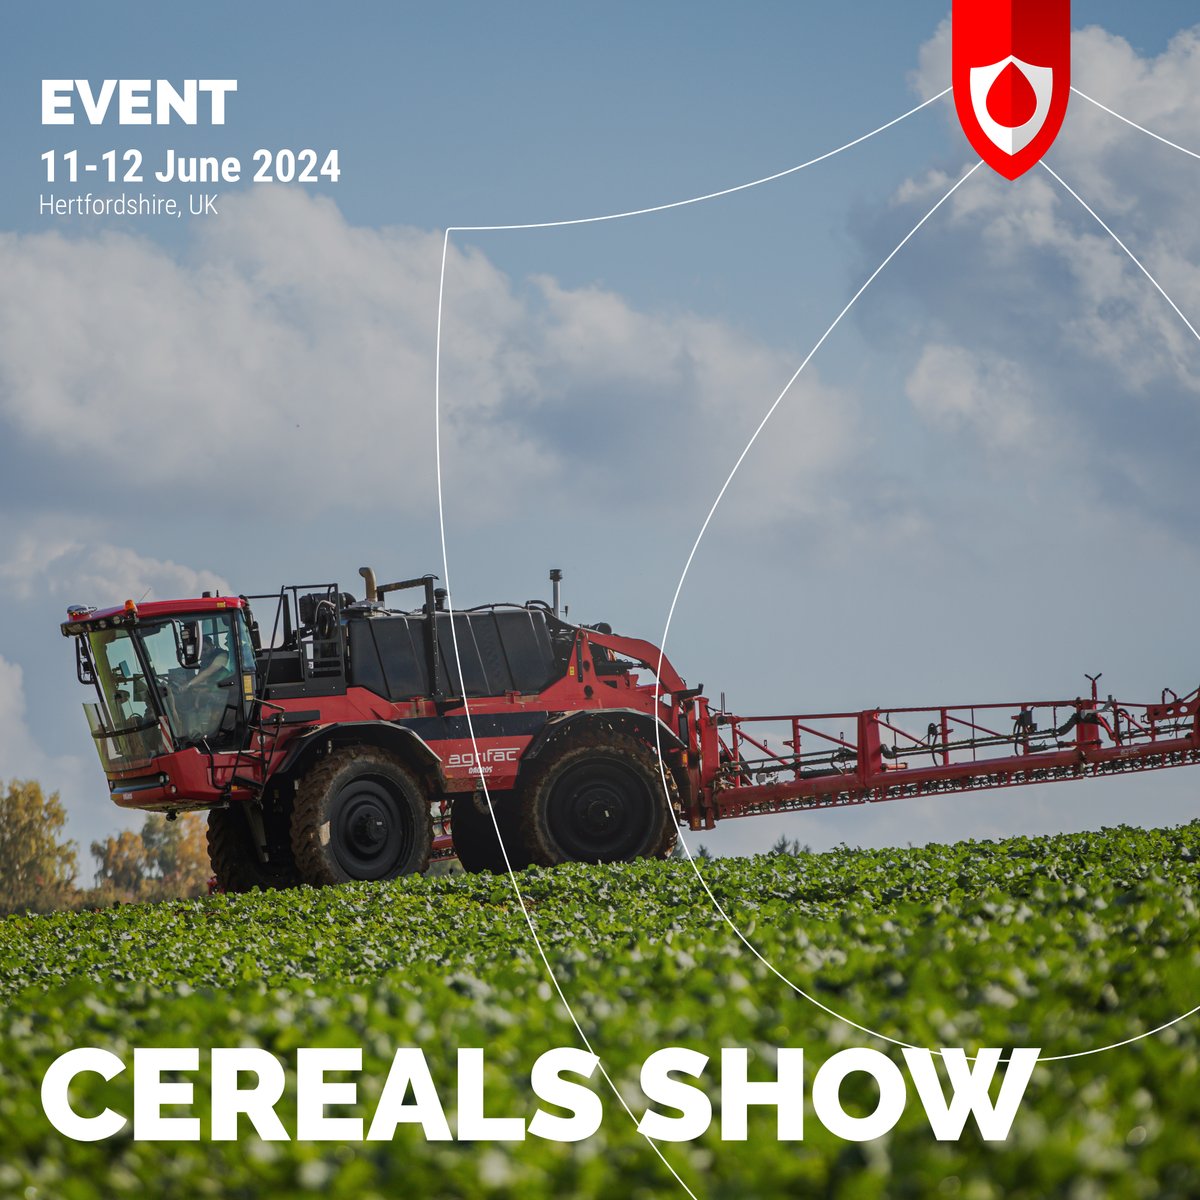 One month to go until the doors to @CerealsEvent  2024 open! 🥳

Are you joining us at the show this June? You can find the Agrifac team on Stand 918b 💧🌱

Don't forget to pre-register before you arrive: rfg.circdata.com/publish/CER24/

#CerealsEvent #Agrifac #InnovativeSolutions